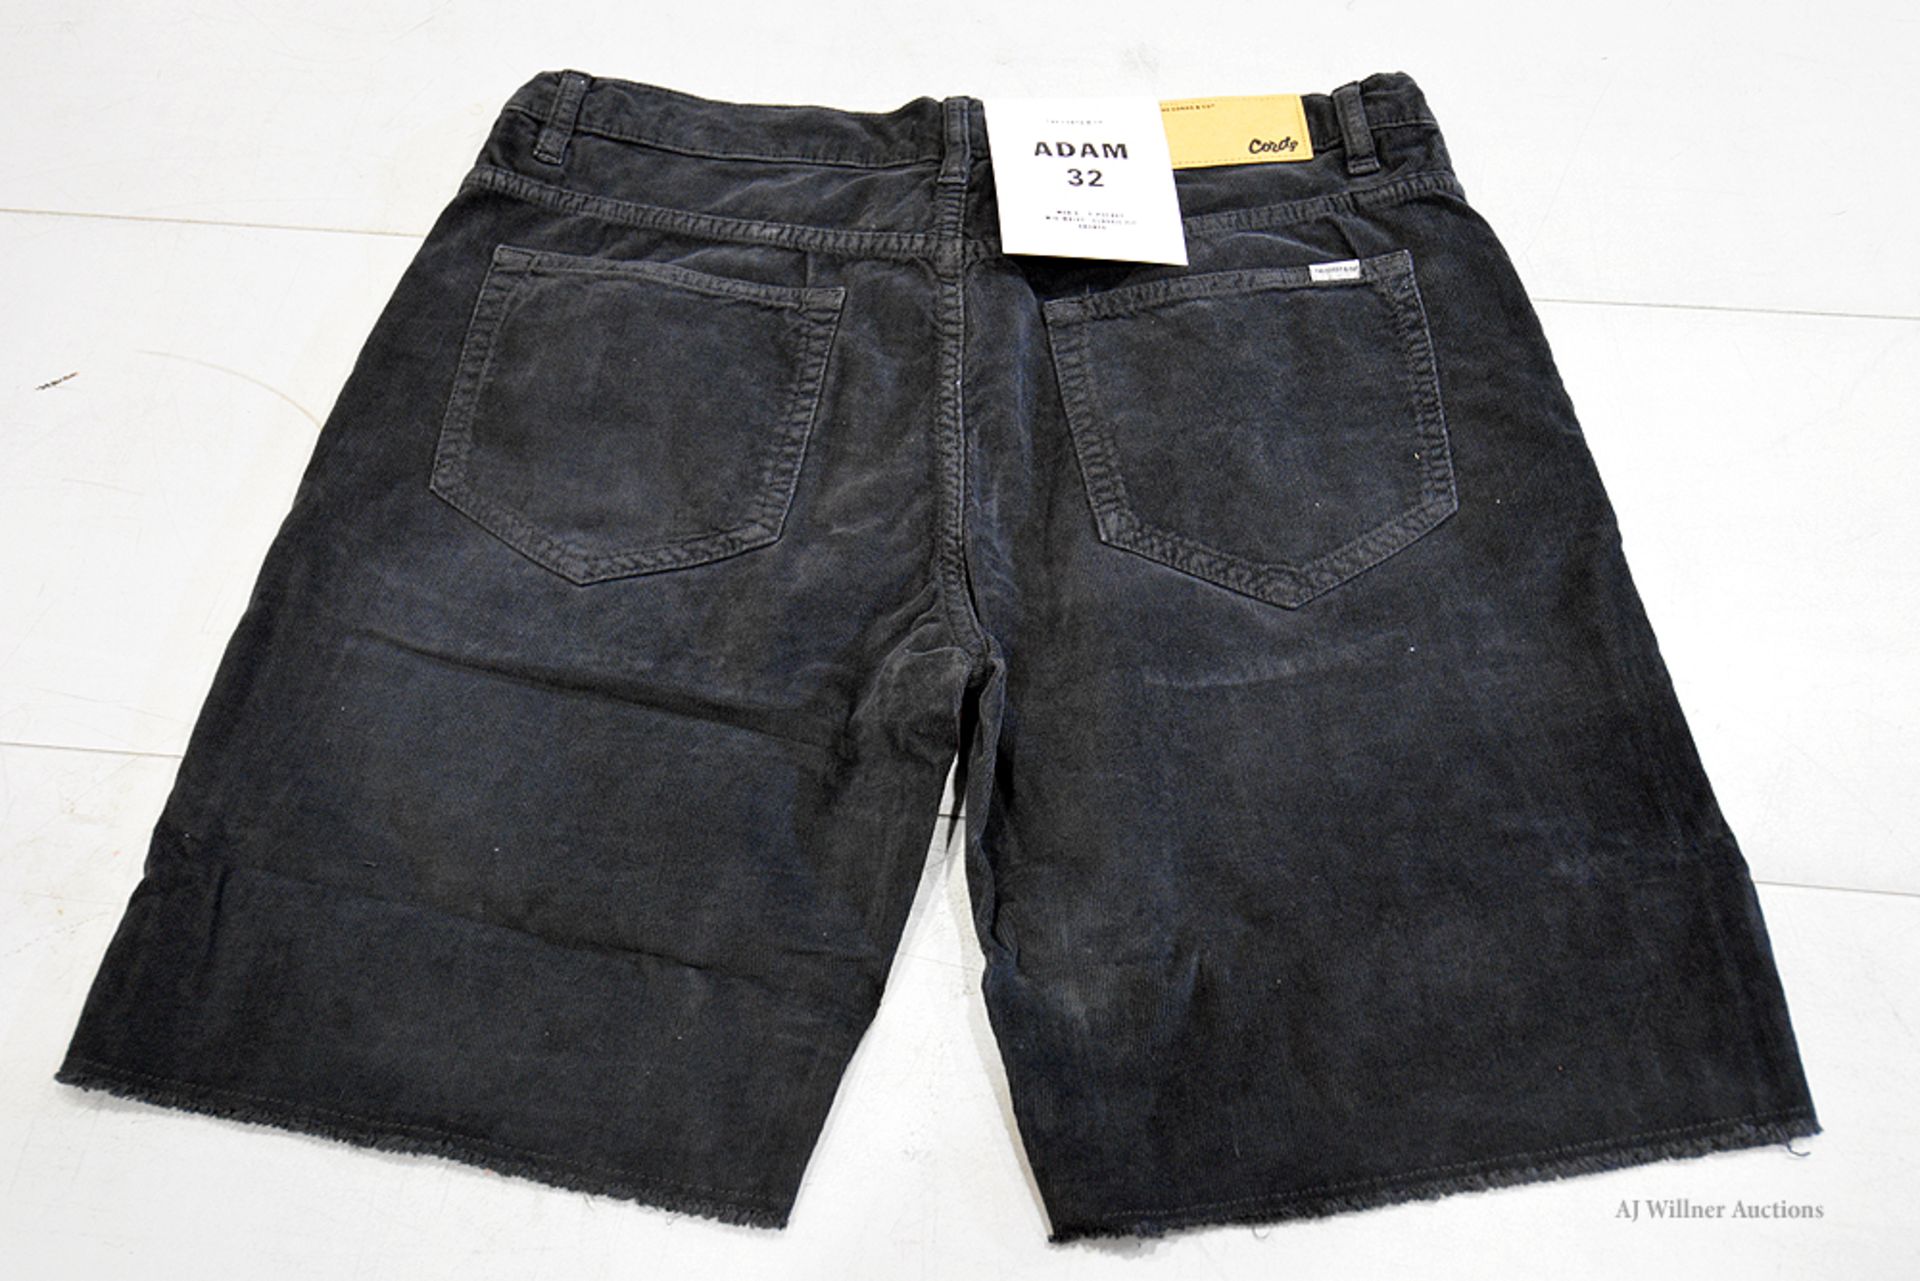 The Cords & Co. "Adam" Men's/ Mid-Waist/ Classic Fit/ Shorts MSRP $100 - Image 3 of 5